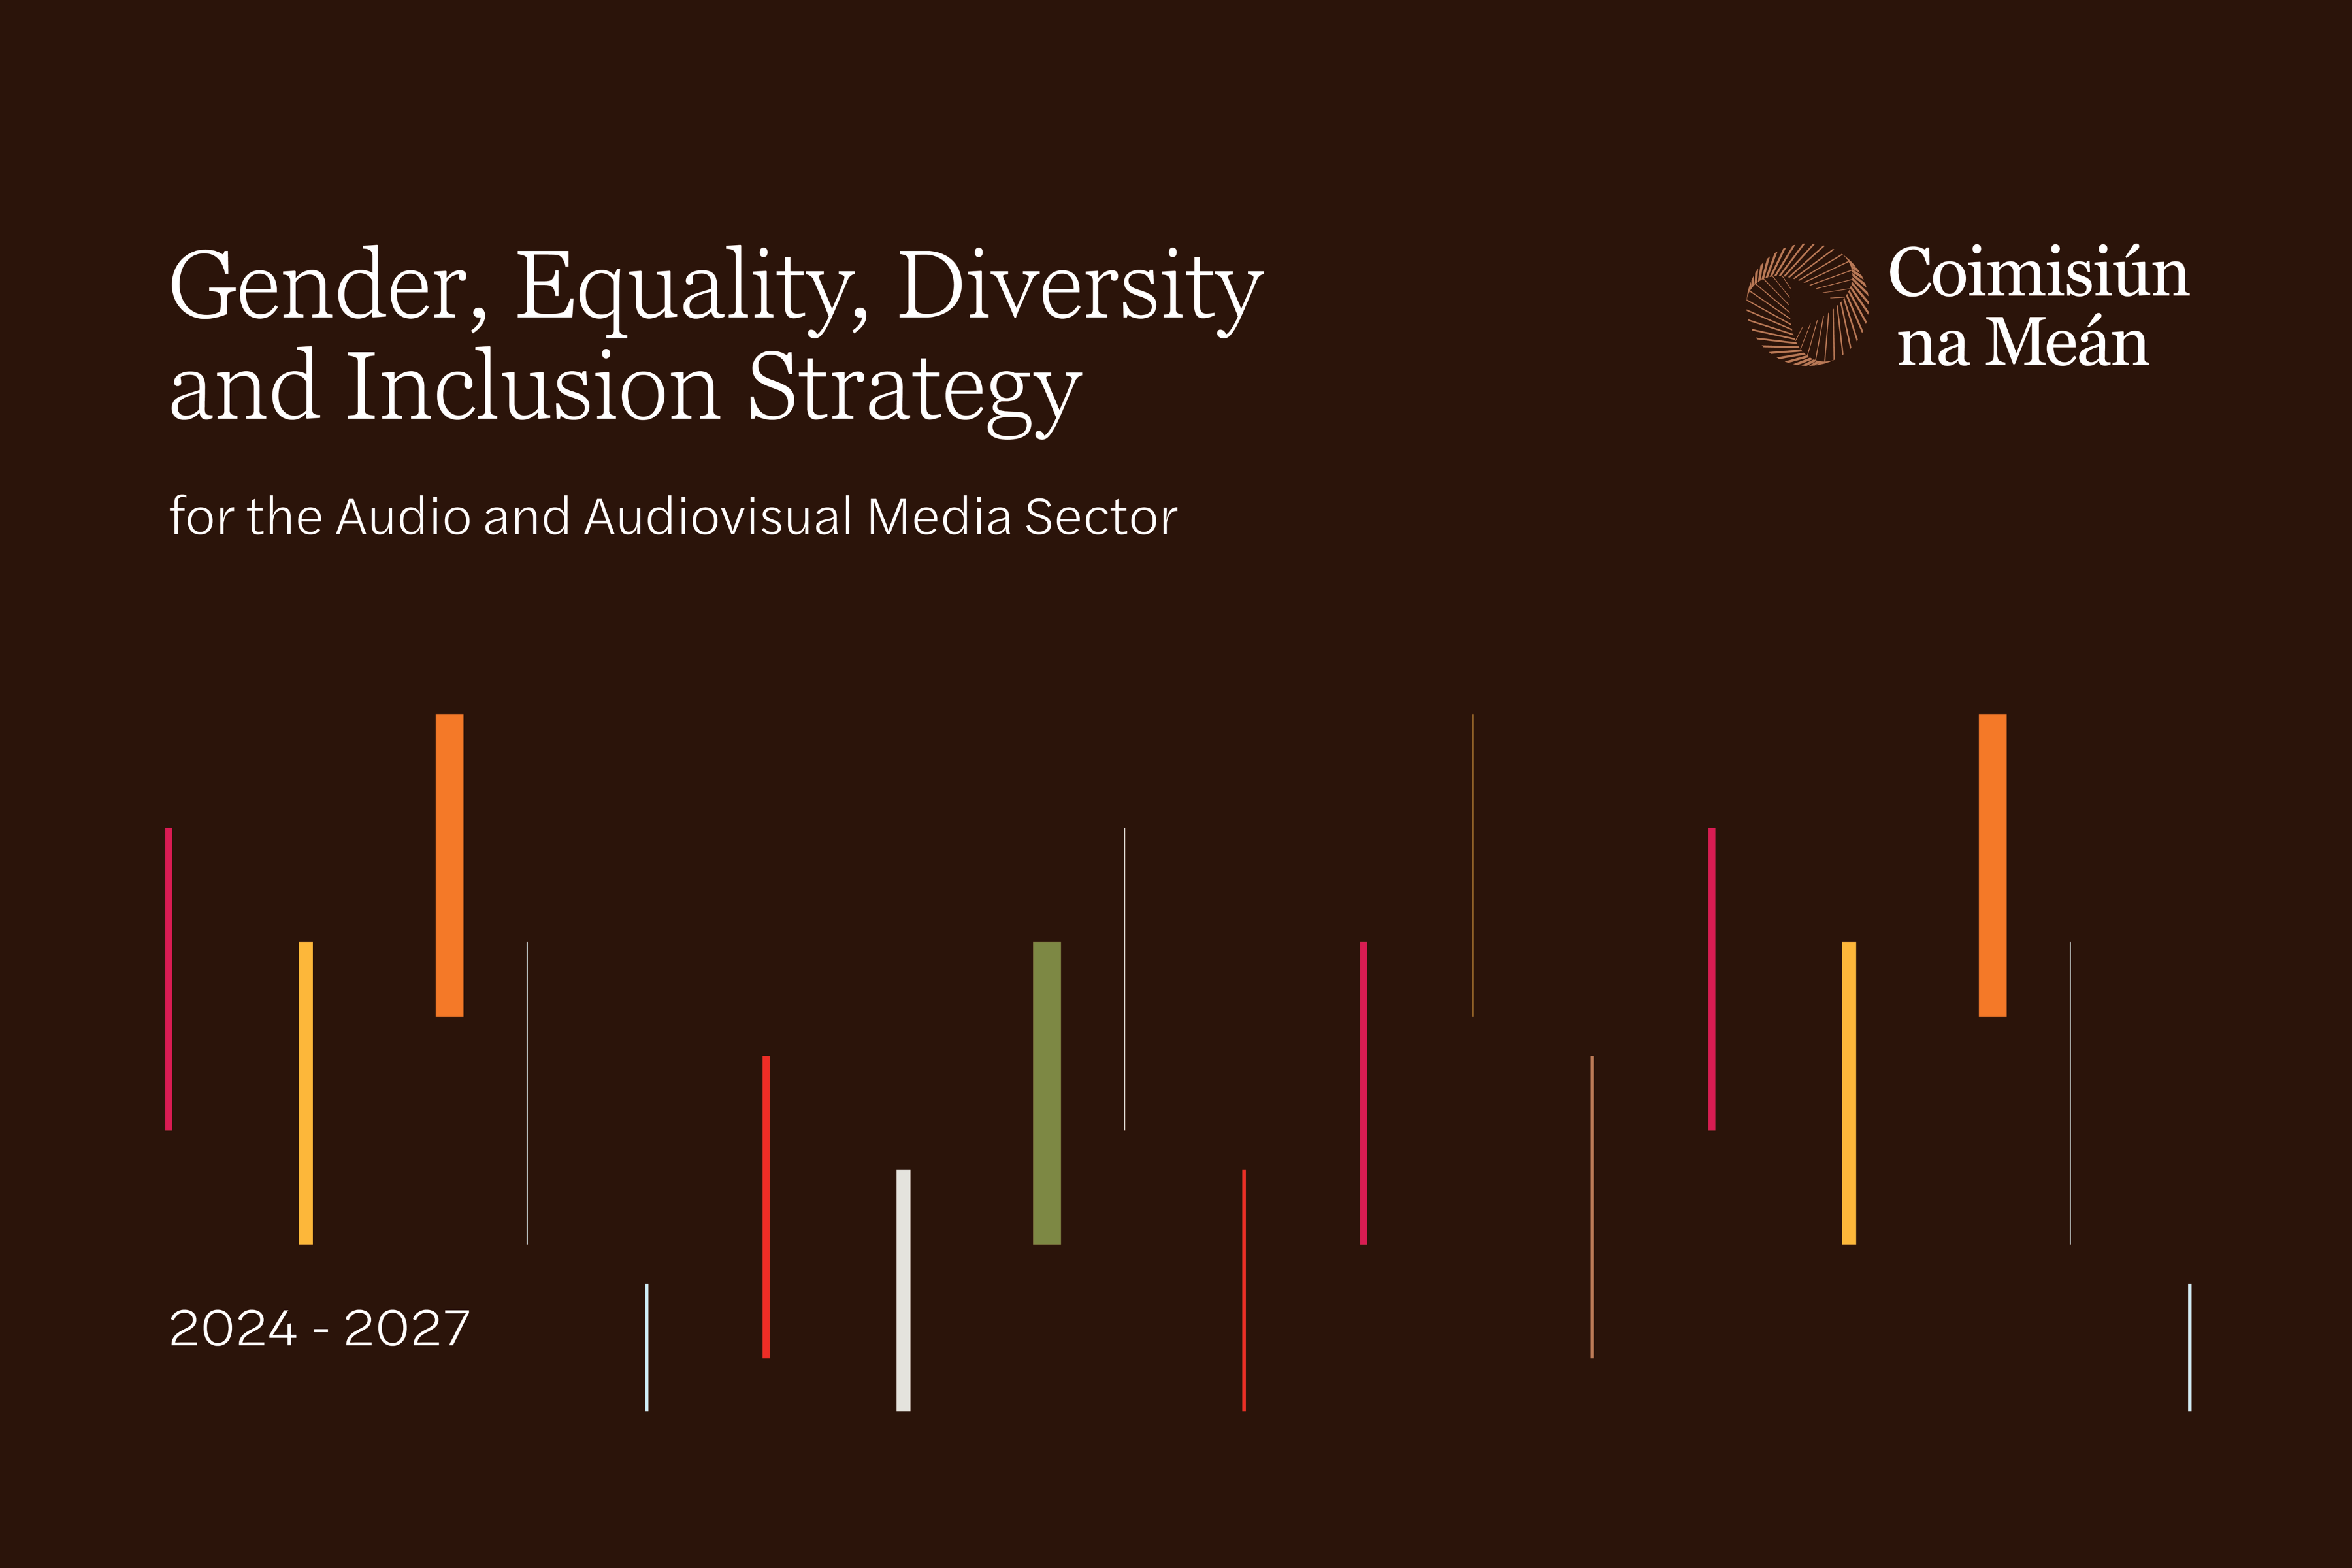 Coimisiún na Meán publishes Gender, Equality, Diversity and Inclusion Strategy for the media sector in Ireland